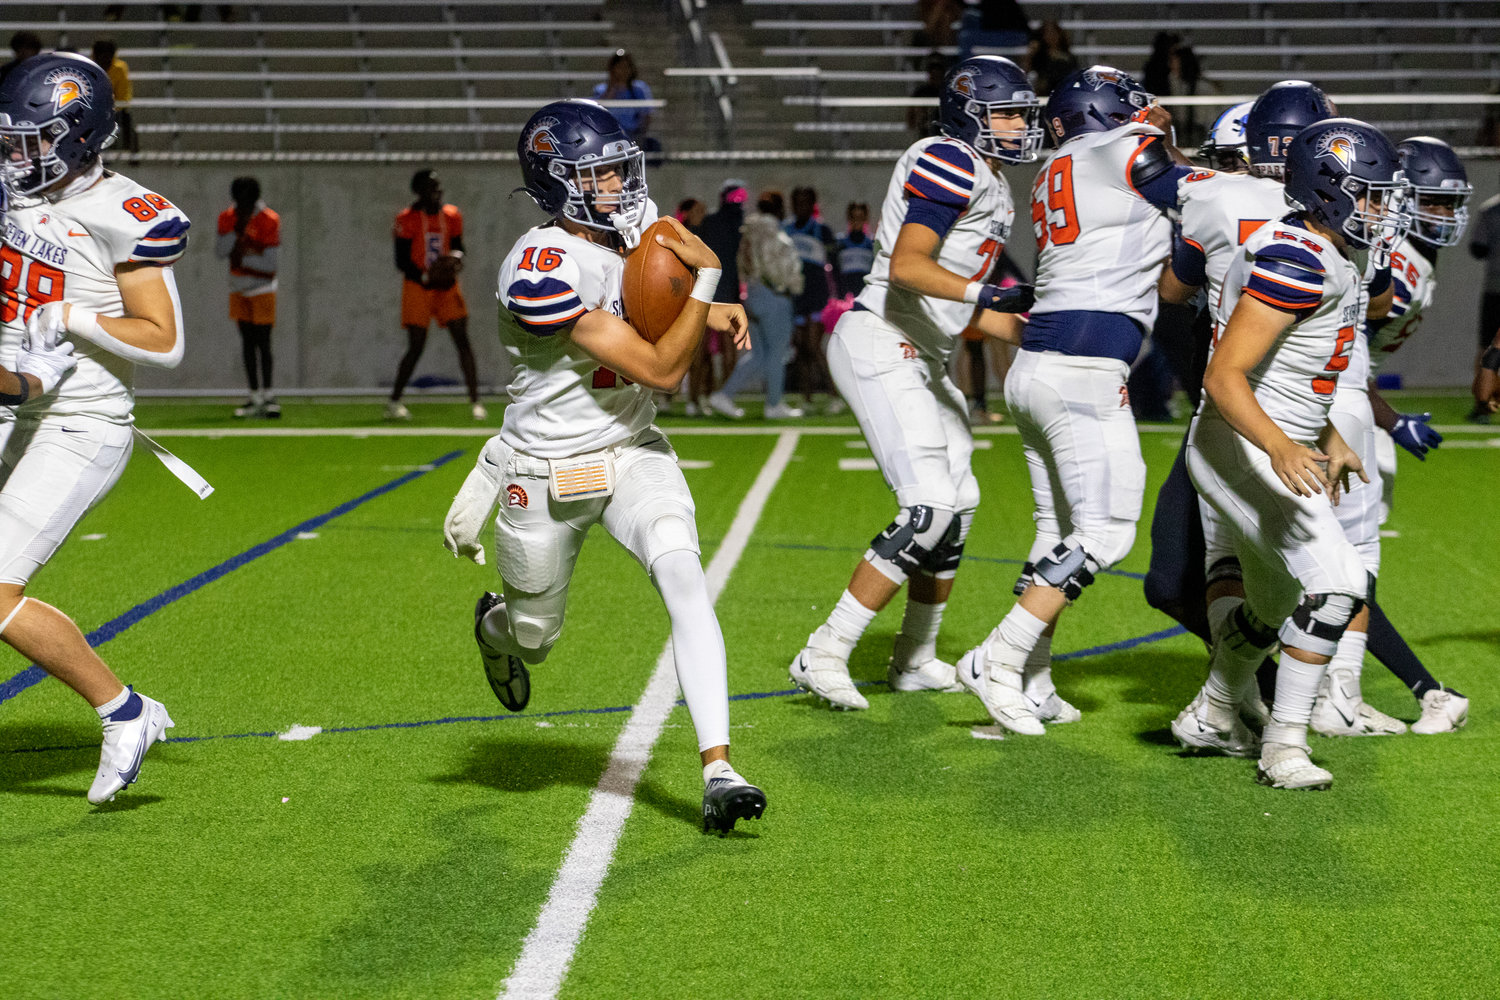 Seven Lakes Collin Mills runs the ball during Thursday's game between Paetow and Seven Lakes at Legacy Stadium.